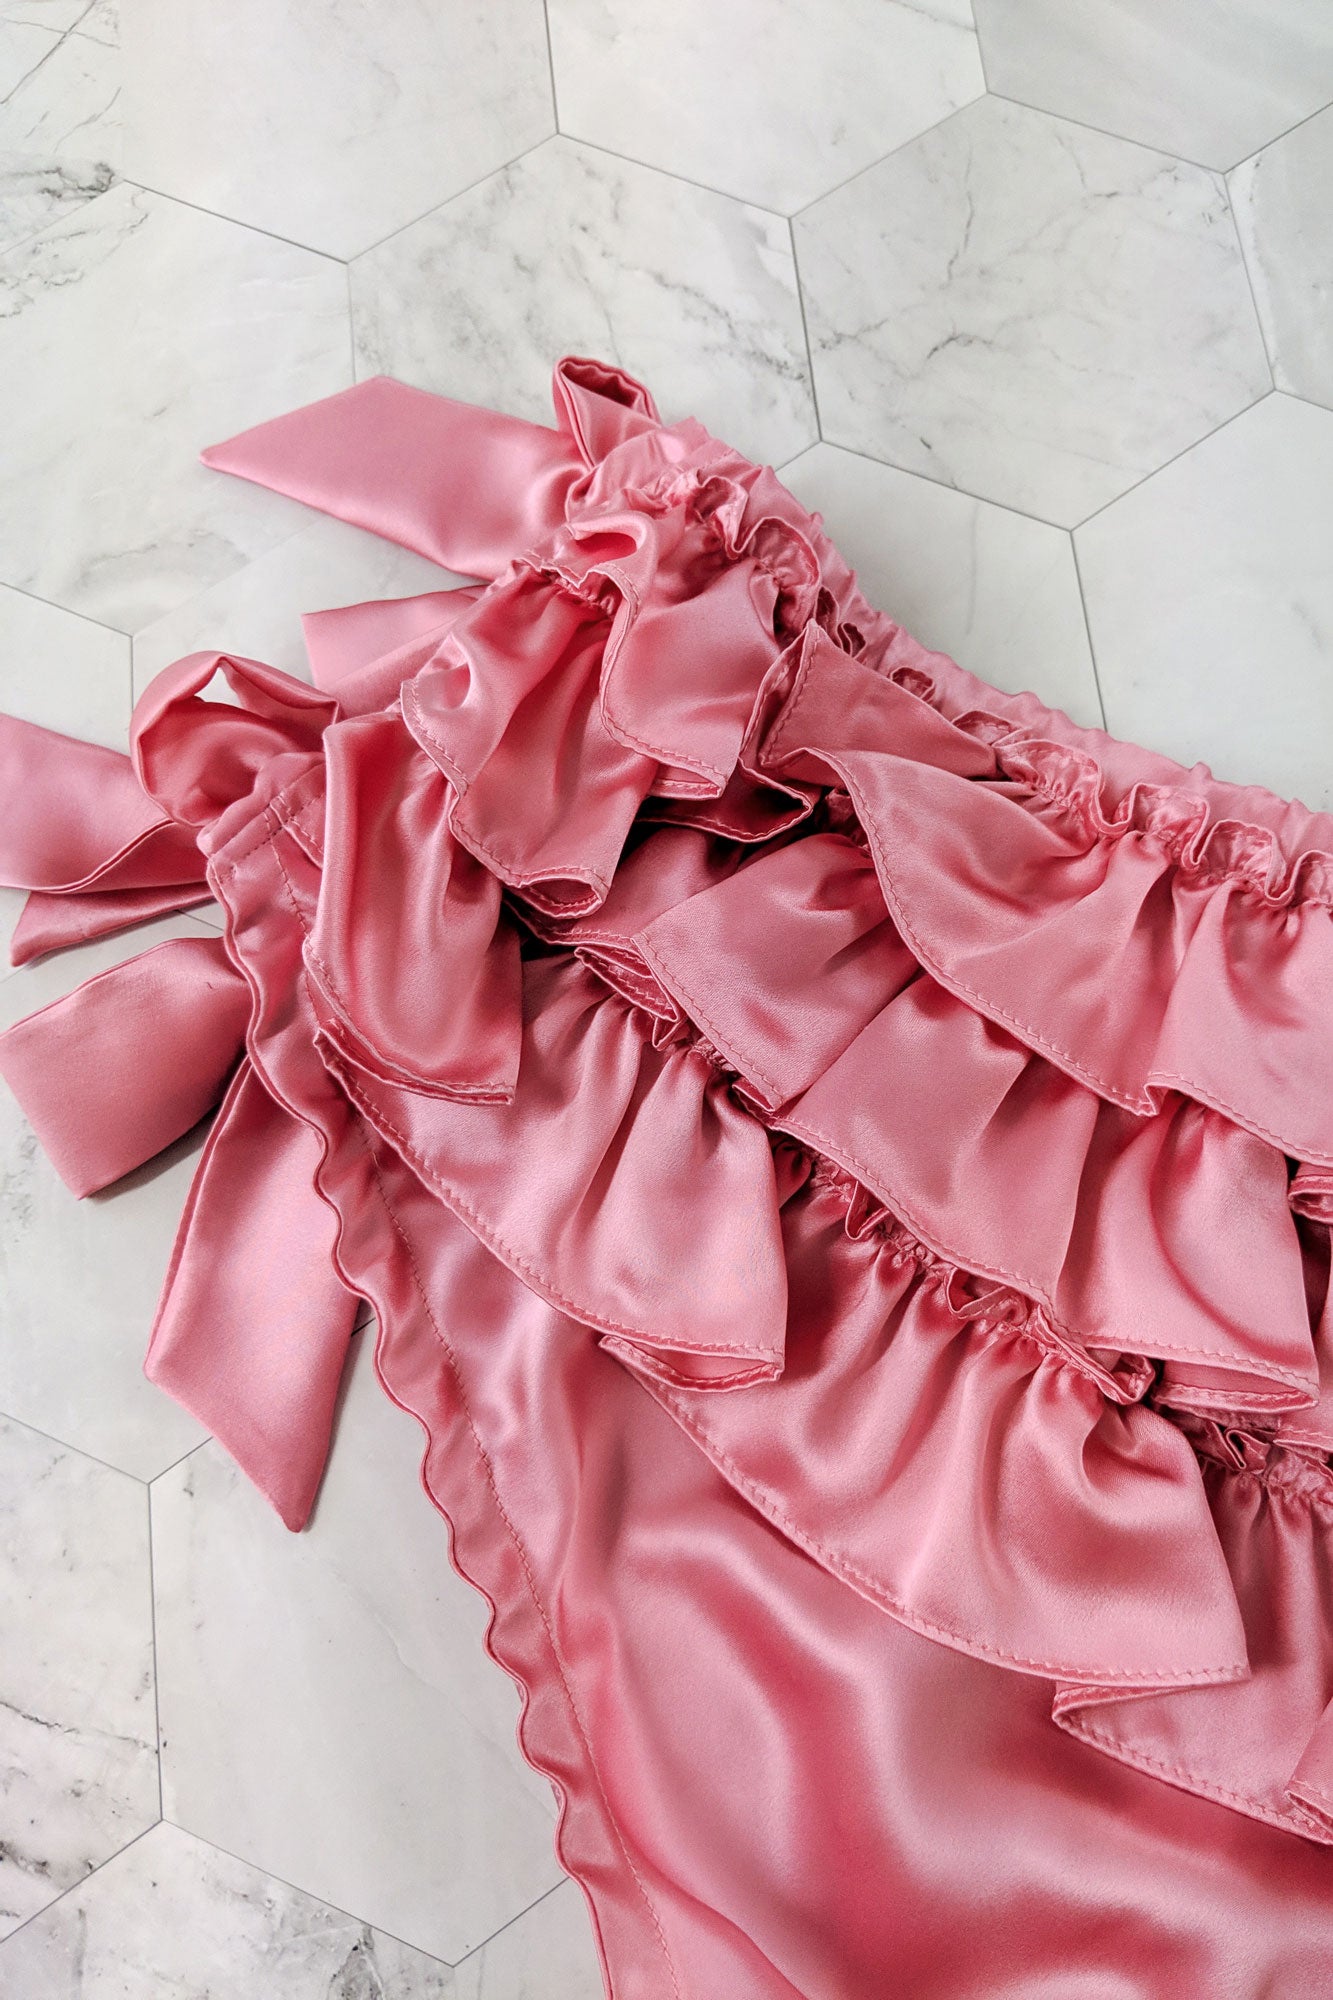 Bright pink burlesque costume with satin ruffle knickers in 100% silk satin